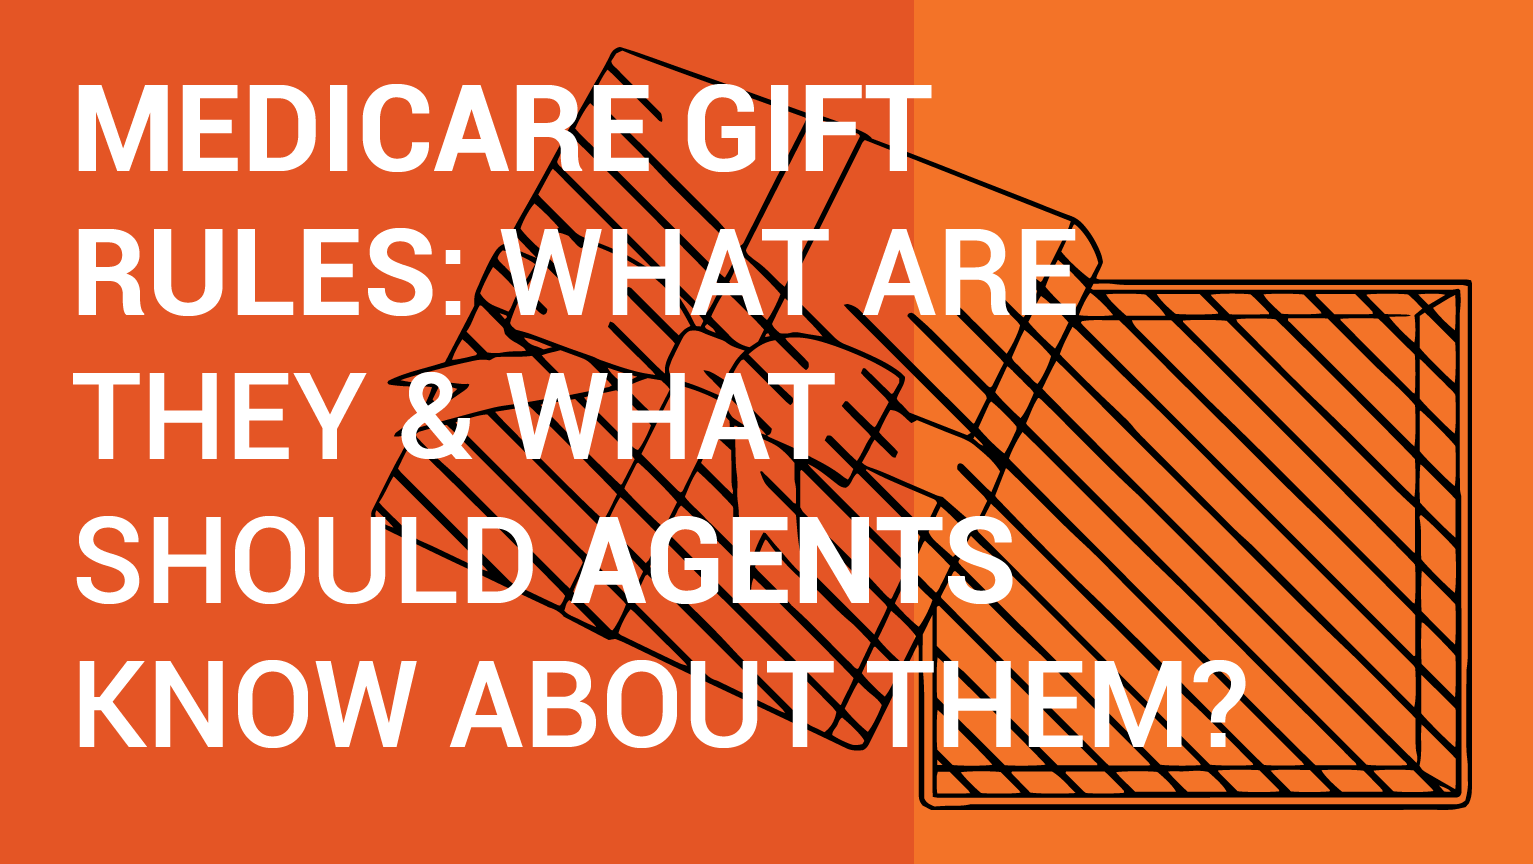 Medicare Gift Rules What Are They? Magellan Healthcare